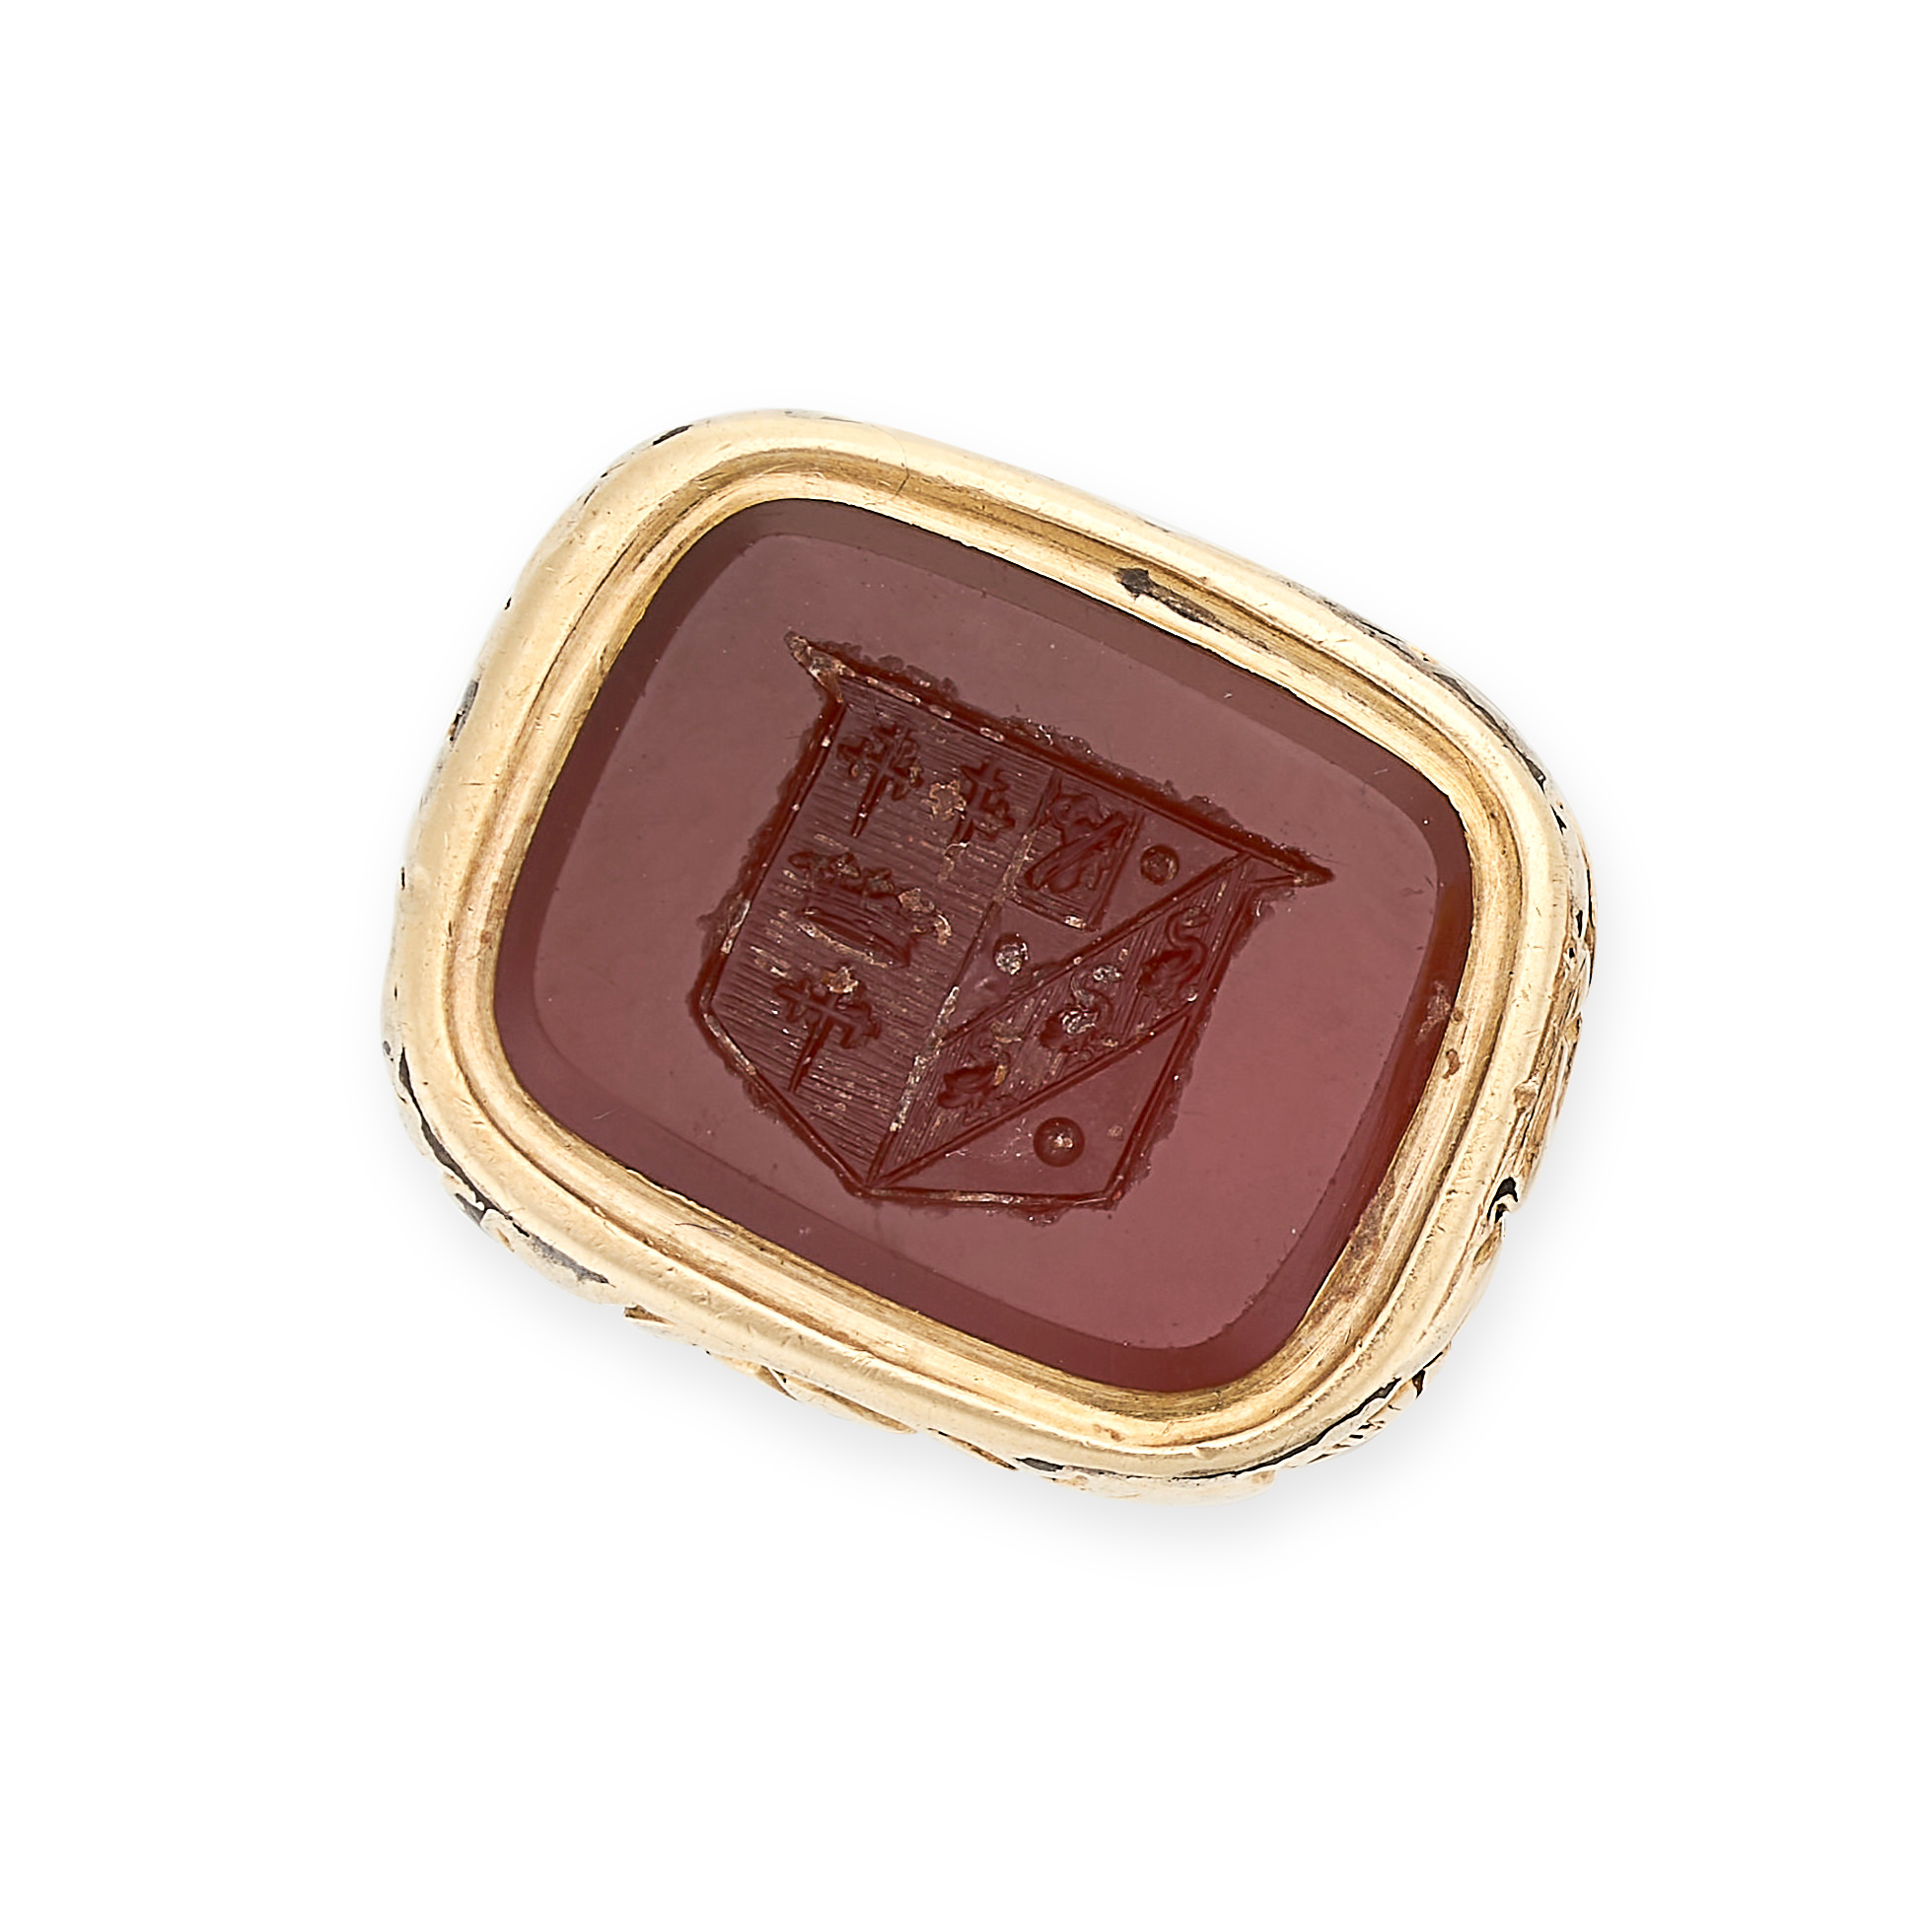 NO RESERVE - AN ANTIQUE CARNELIAN INTAGLIO FOB SEAL PENDANT, 19TH CENTURY in yellow gold, set with a